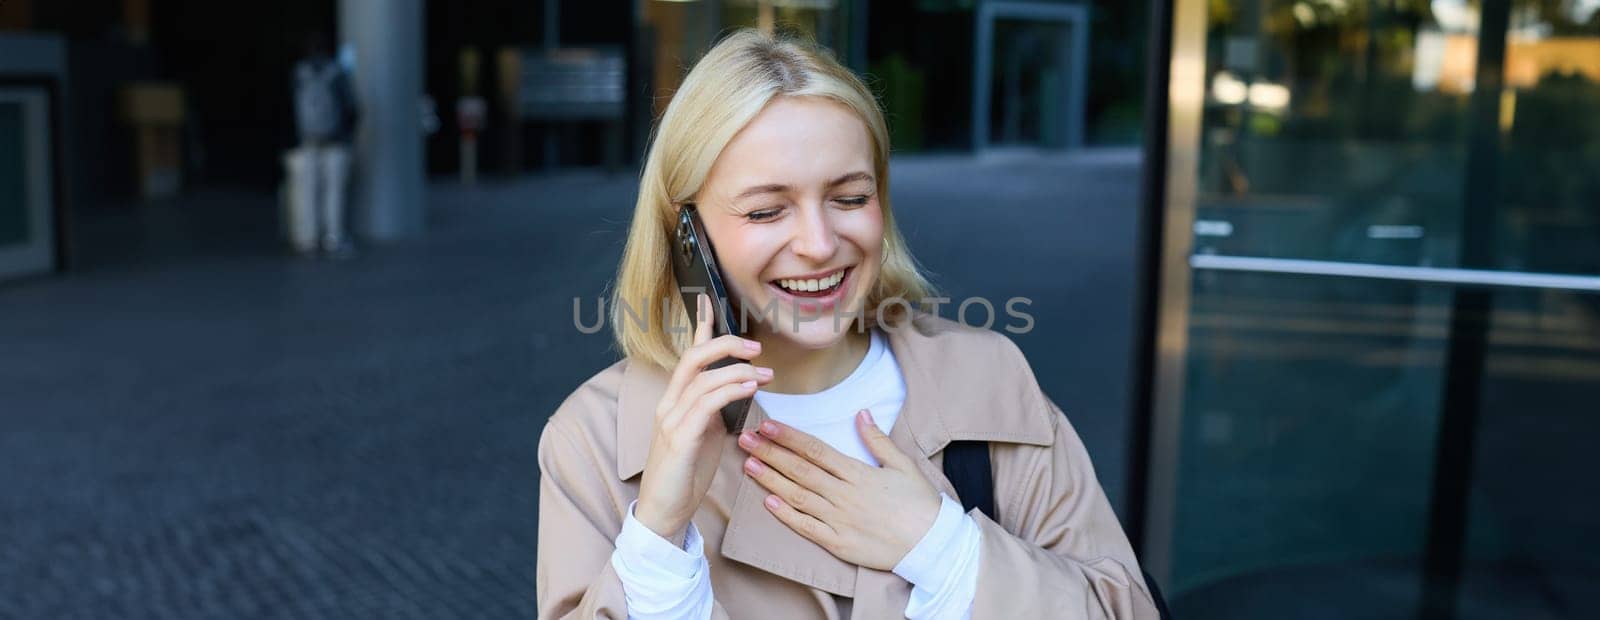 Close up portrait of carefree blond woman, talking on mobile phone, answer a call, laughing over funny conversation on smartphone.